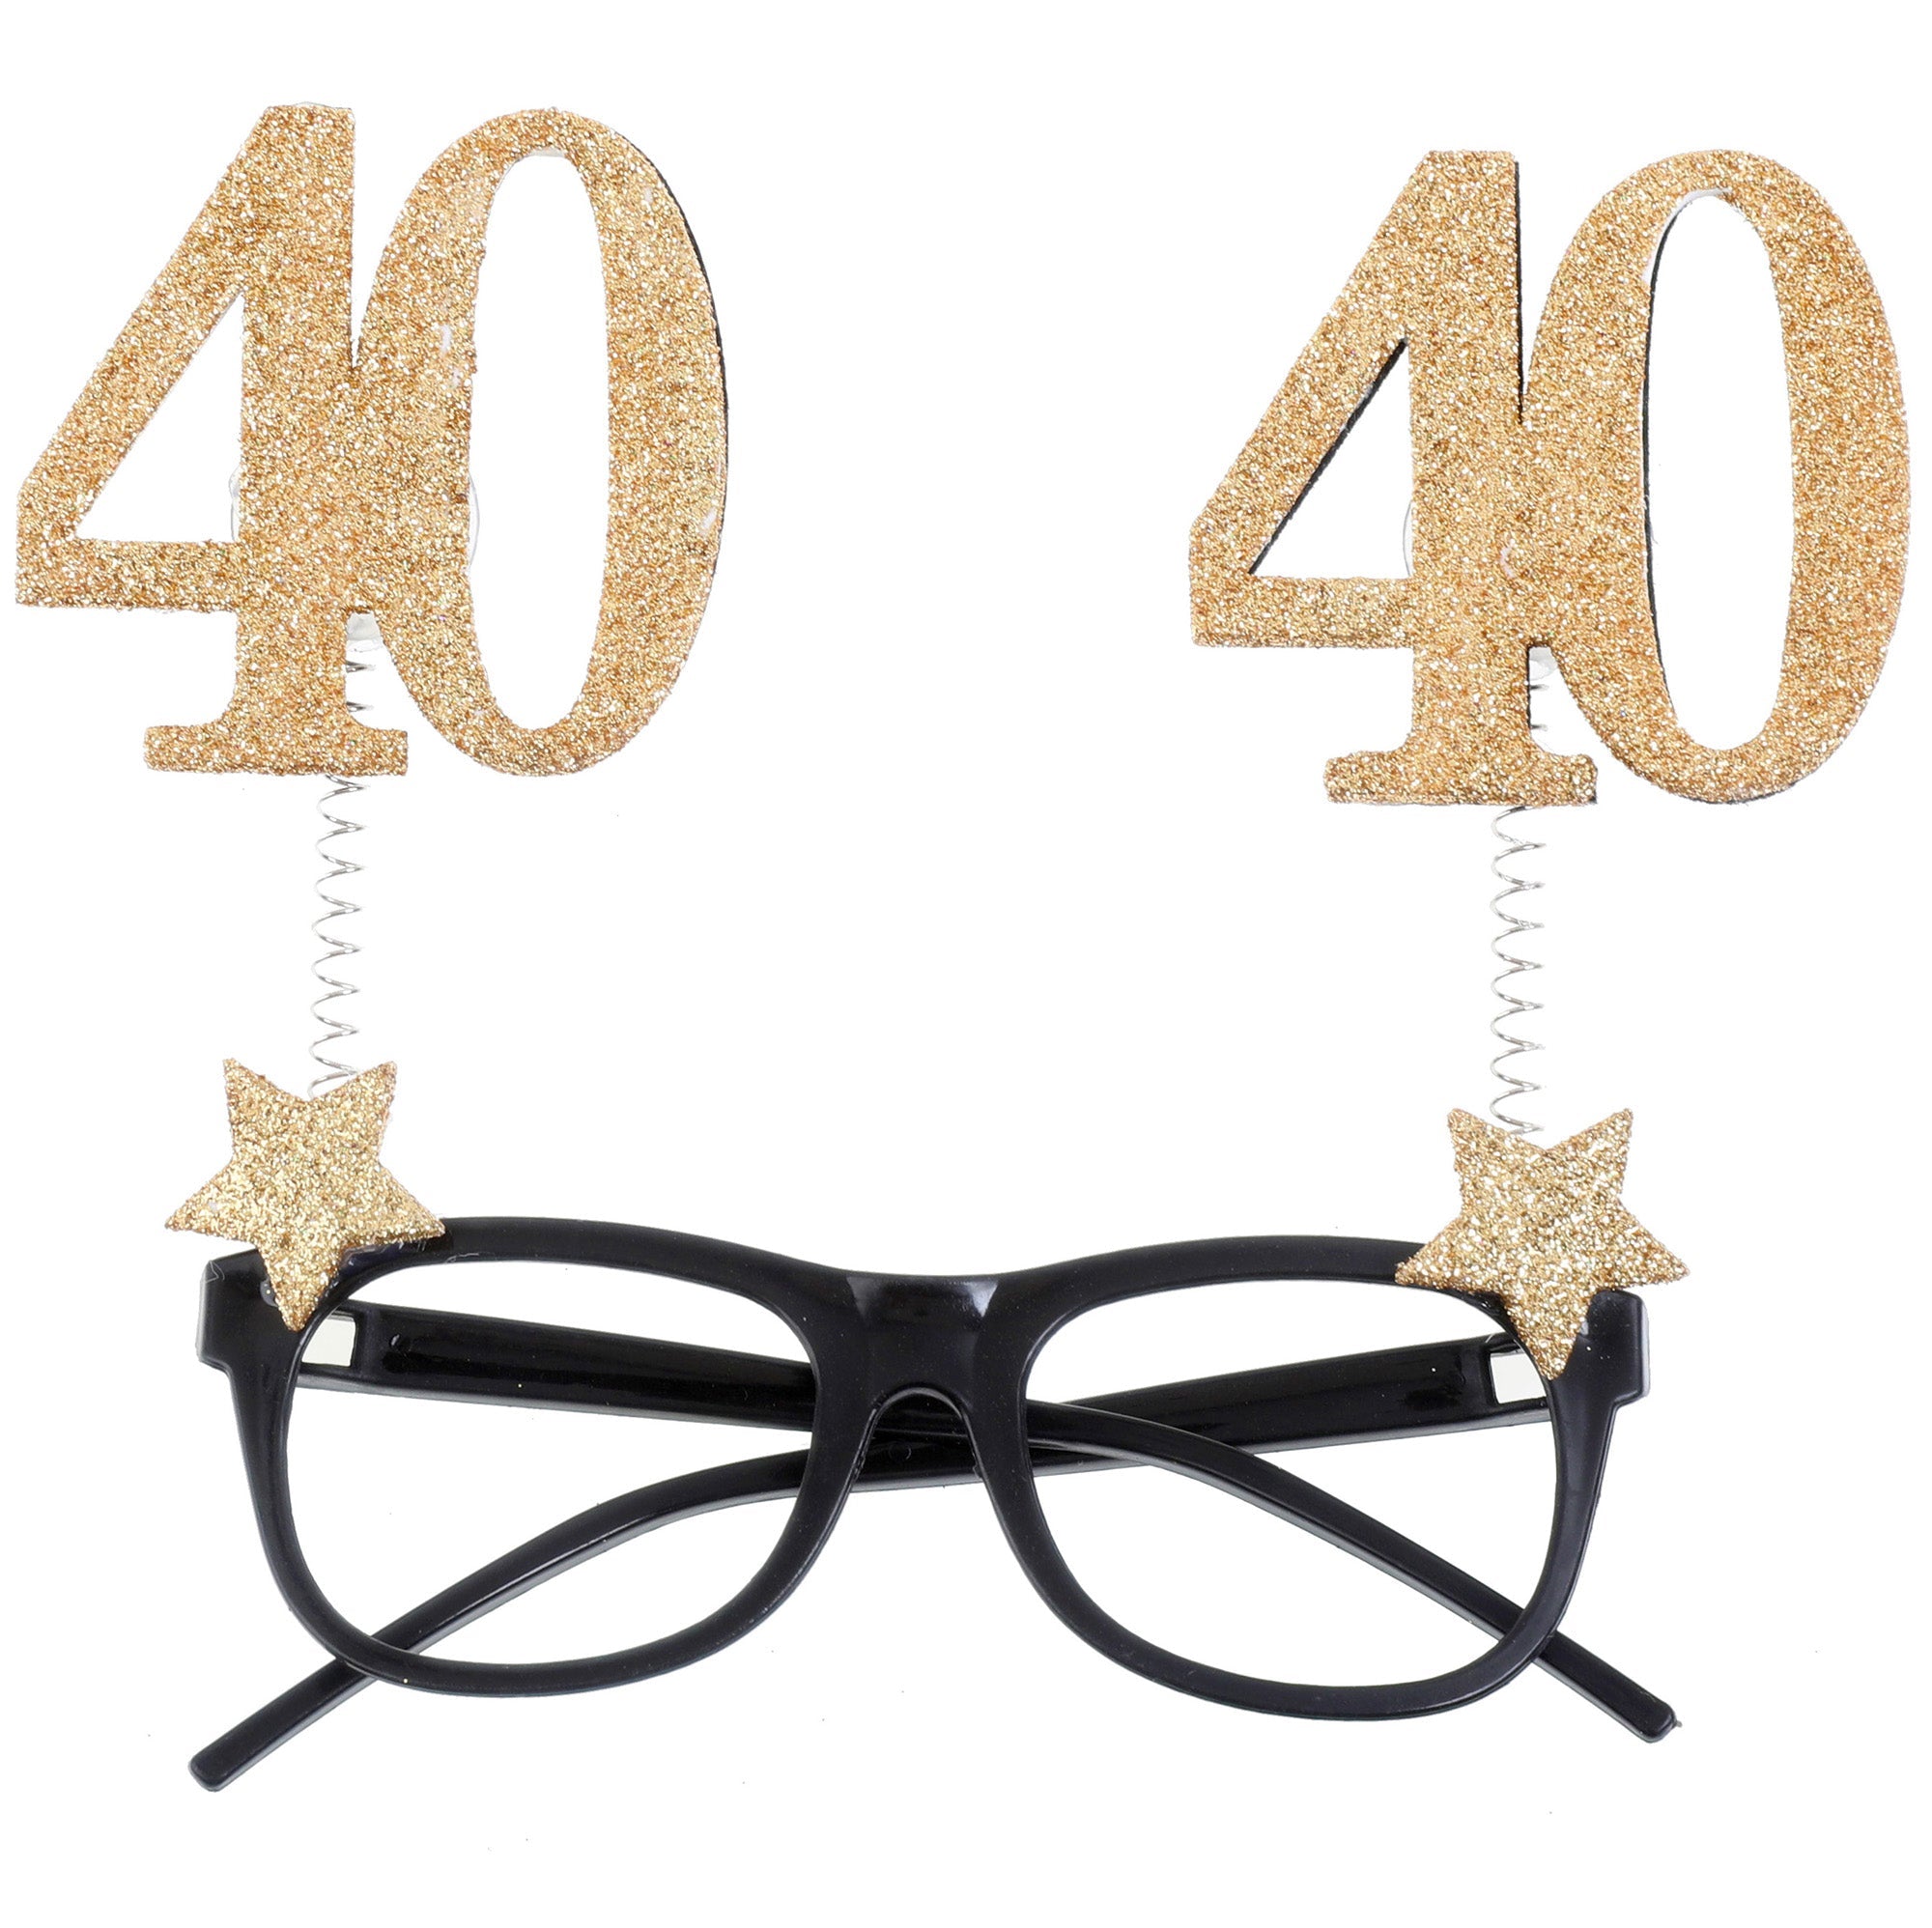 Age 40 Glasses Black and Gold 6x6.3in